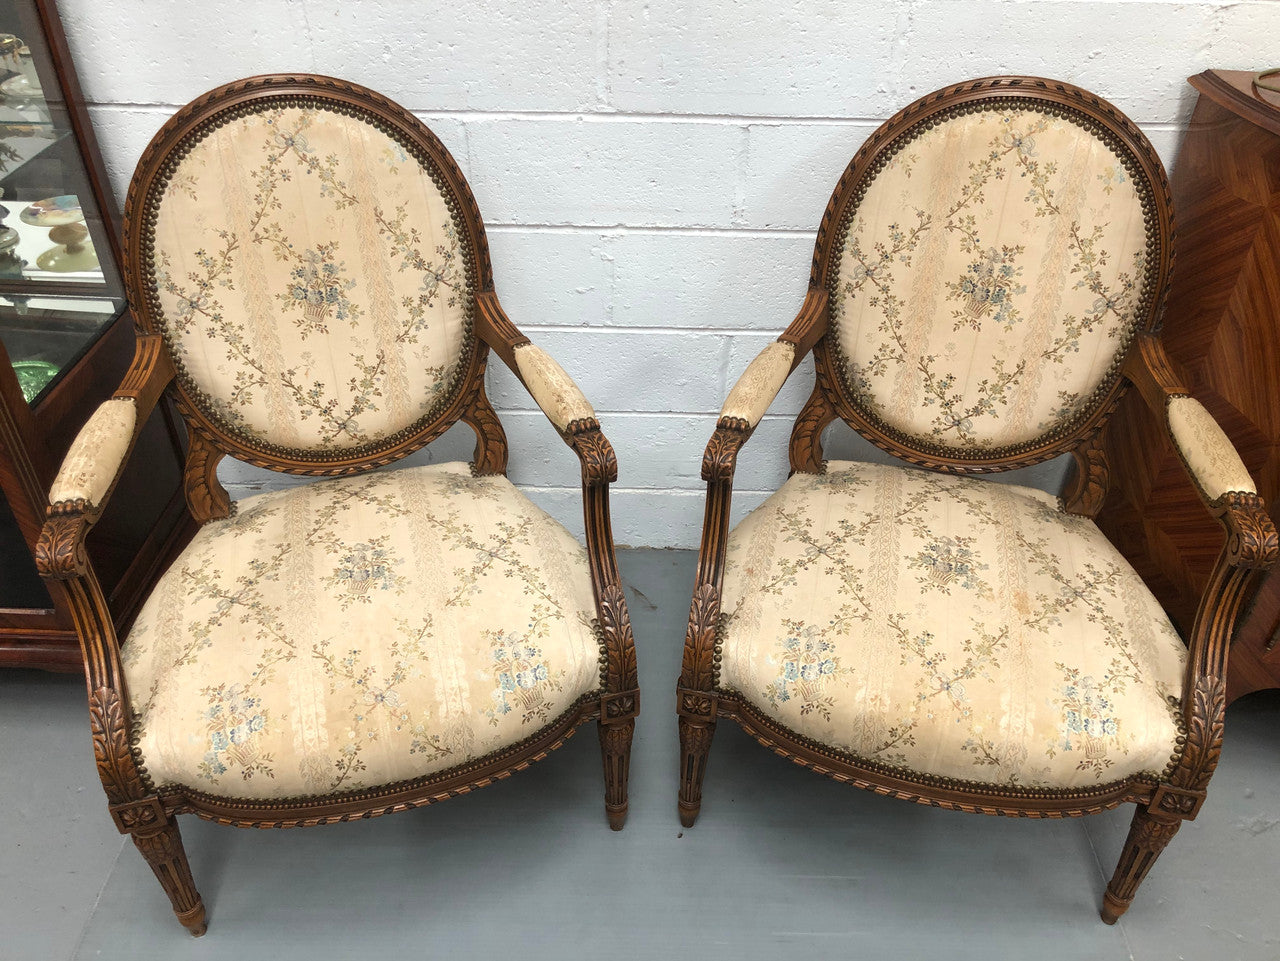 Pair of Antique French Louis XVI style carved Walnut fauteuils in restored condition. The Tapestry upholstery is in good condition some marks and wear but usable.